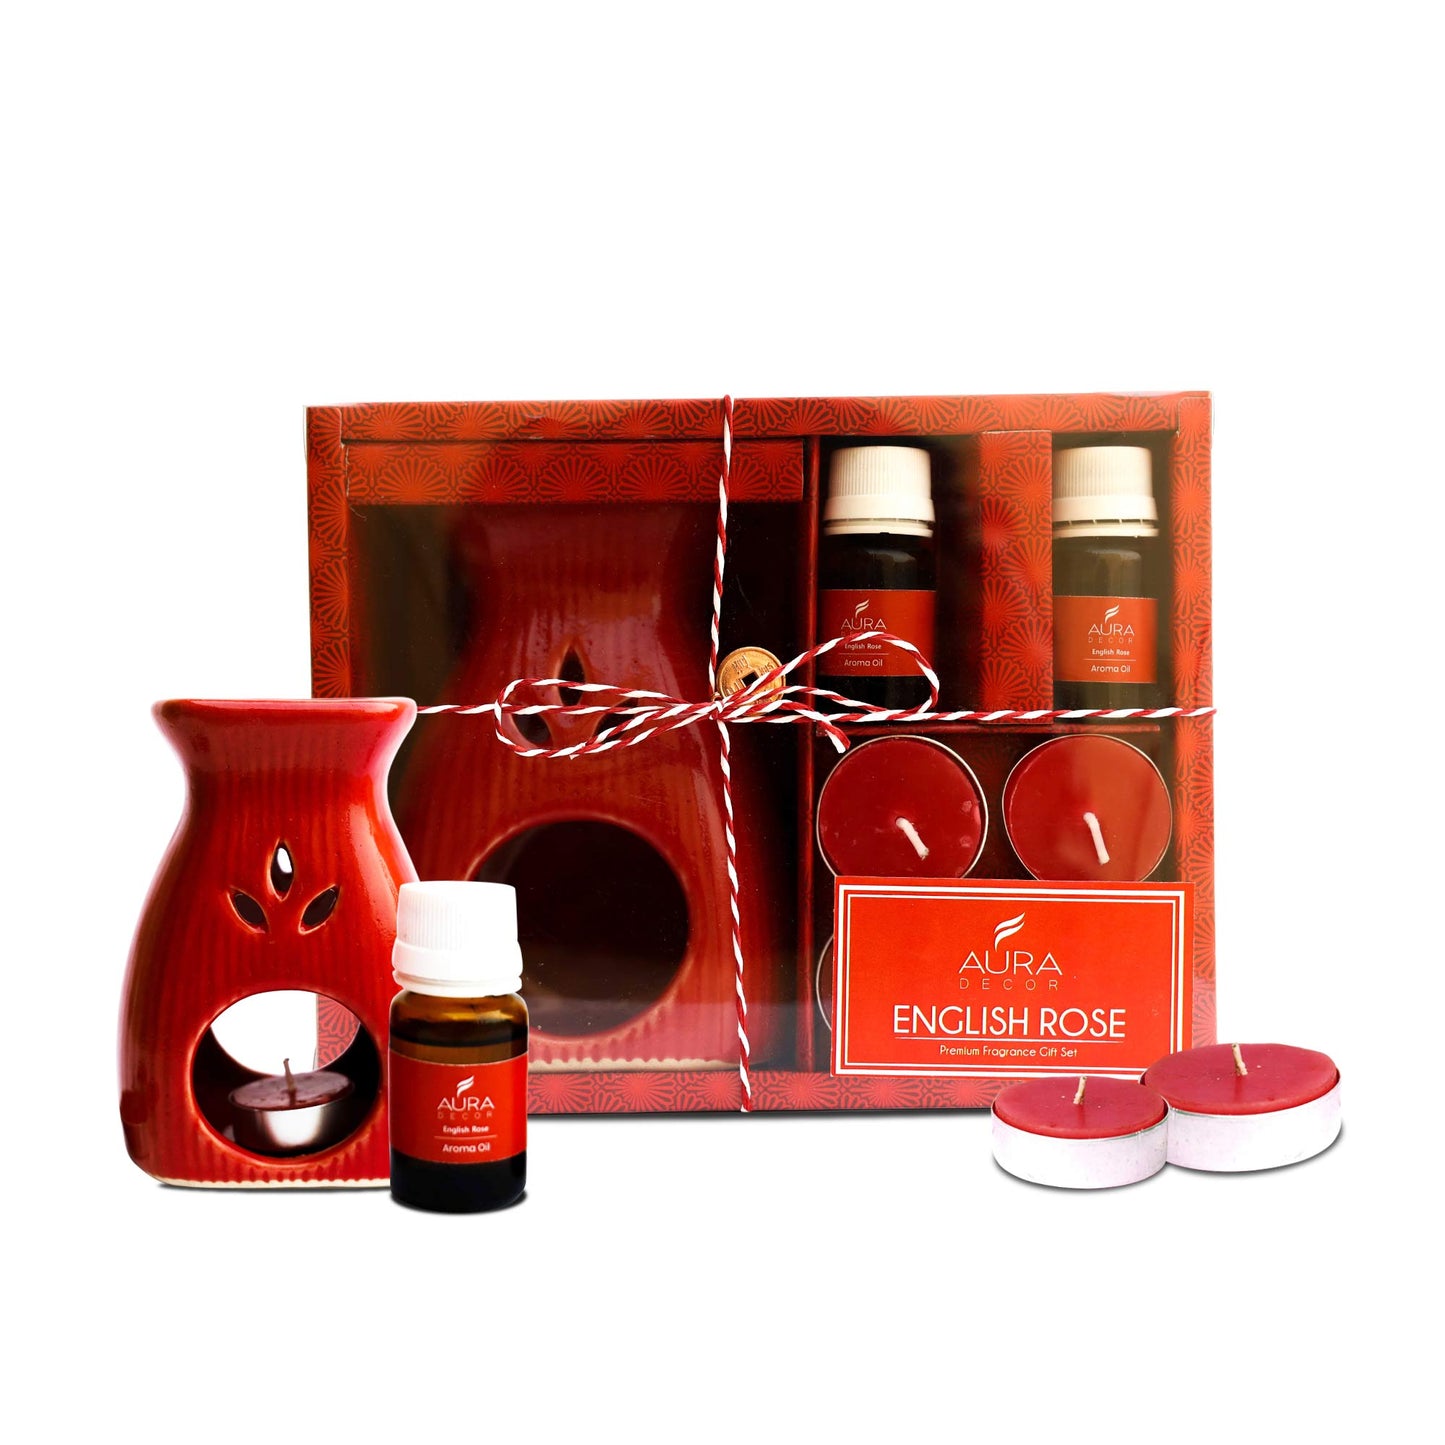 AuraDecor Aromatherapy Diffuser Gift Set with 4 Tealights & 2 Aroma Oil